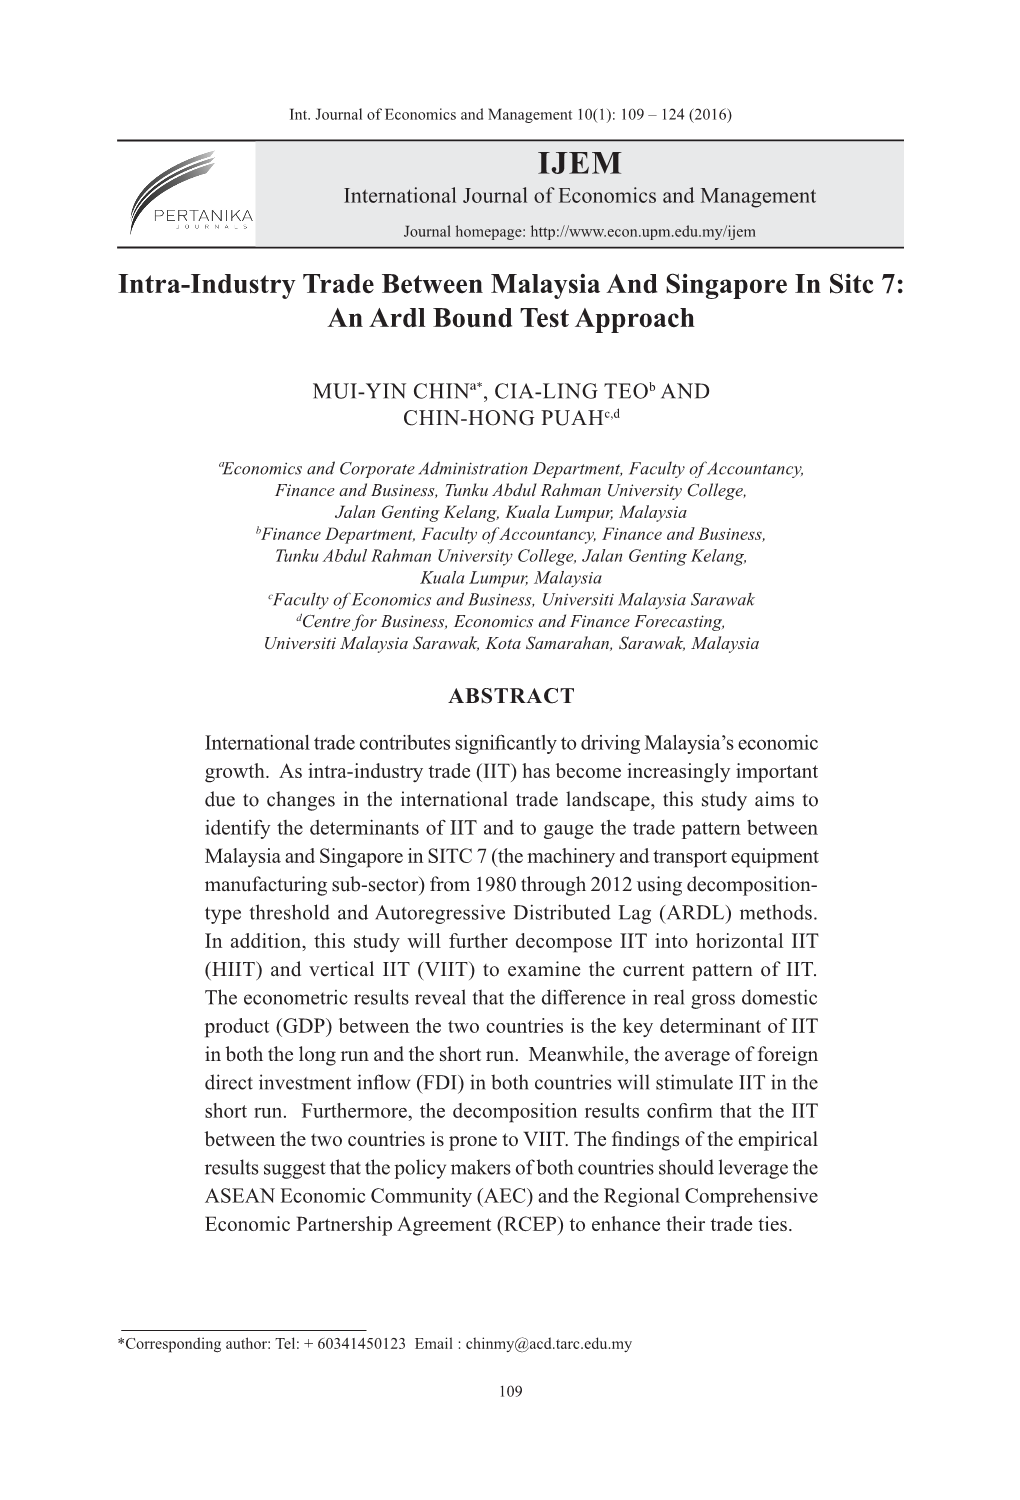 Intra-Industry Trade Between Malaysia and Singapore in Sitc 7: an Ardl Bound Test Approach